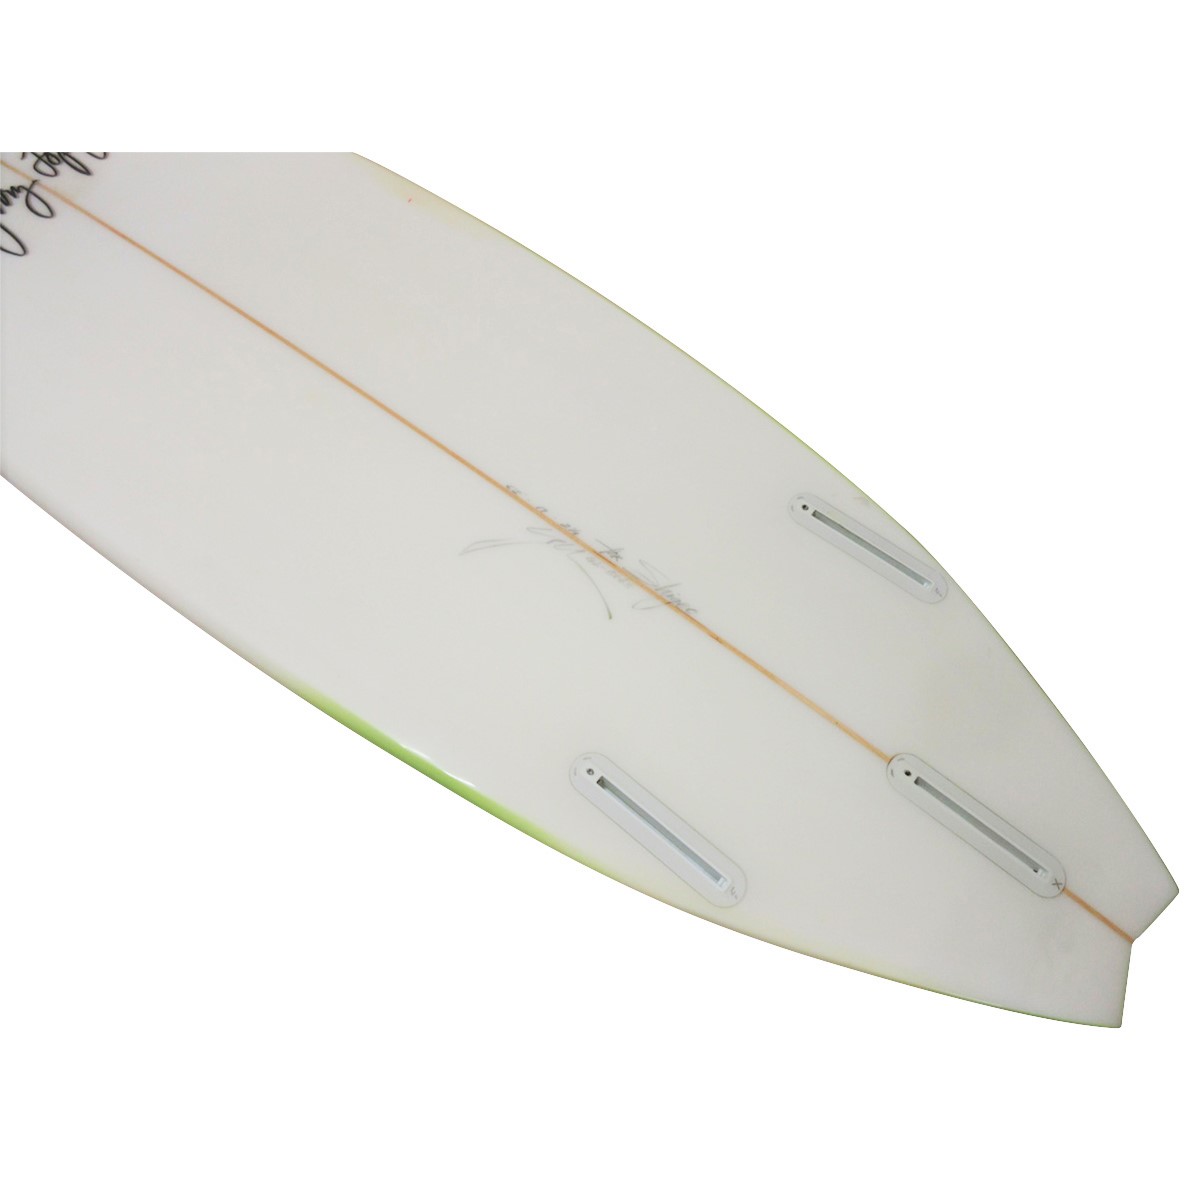 GERRY LOPEZ / Custom Thruster 6`2 Shaped by YU